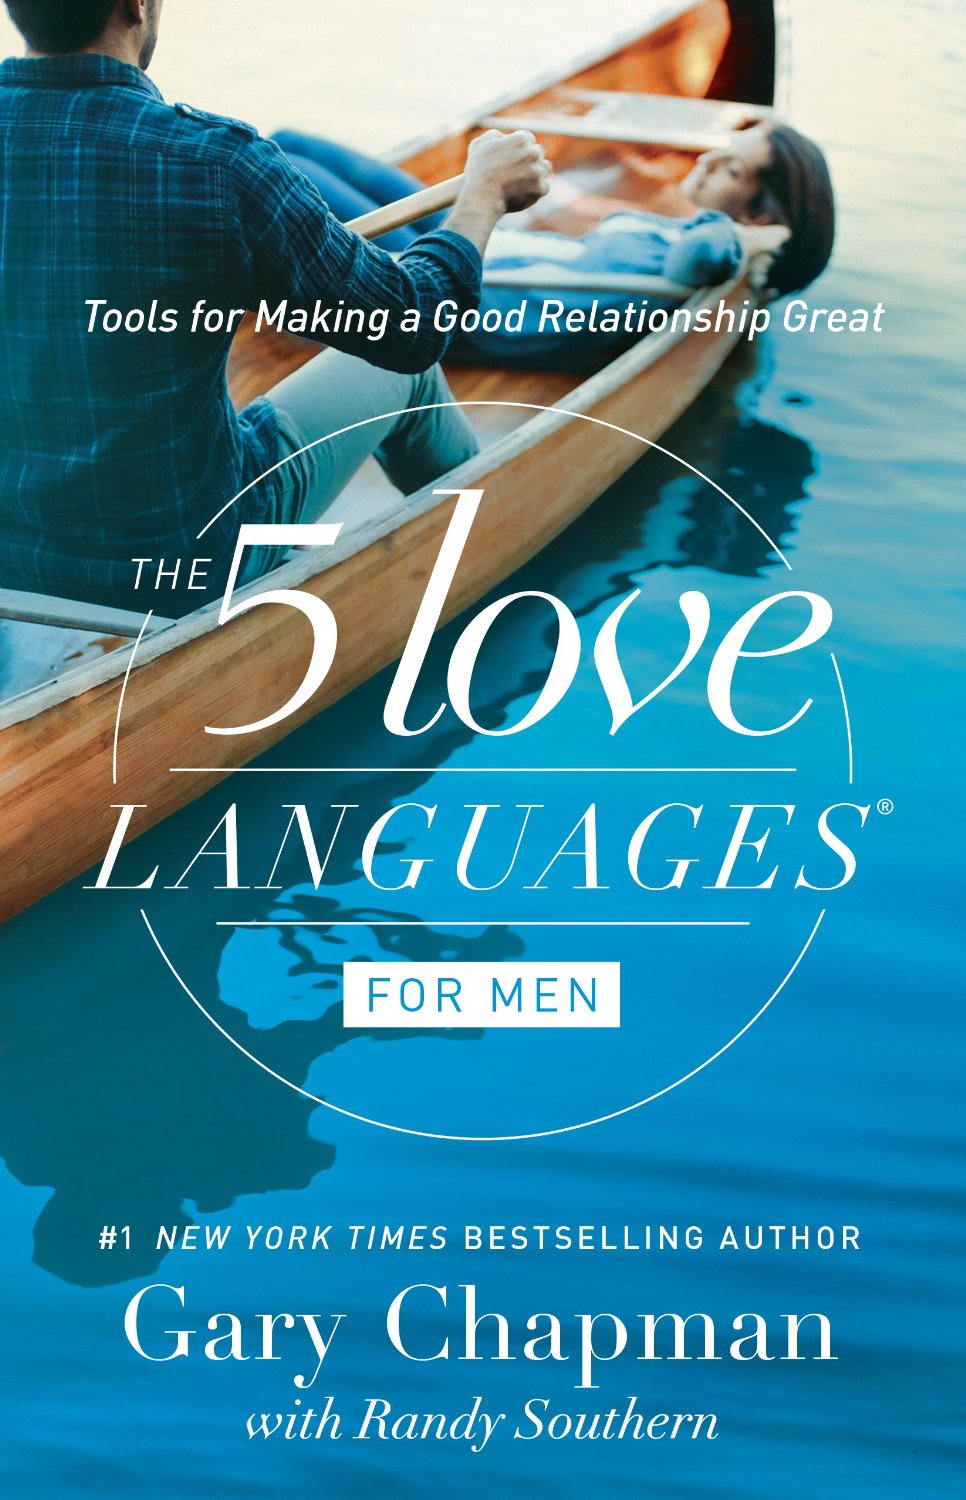 book-review-the-five-love-languages-for-men-by-gary-chapman-and-randy-author-julie-arduini